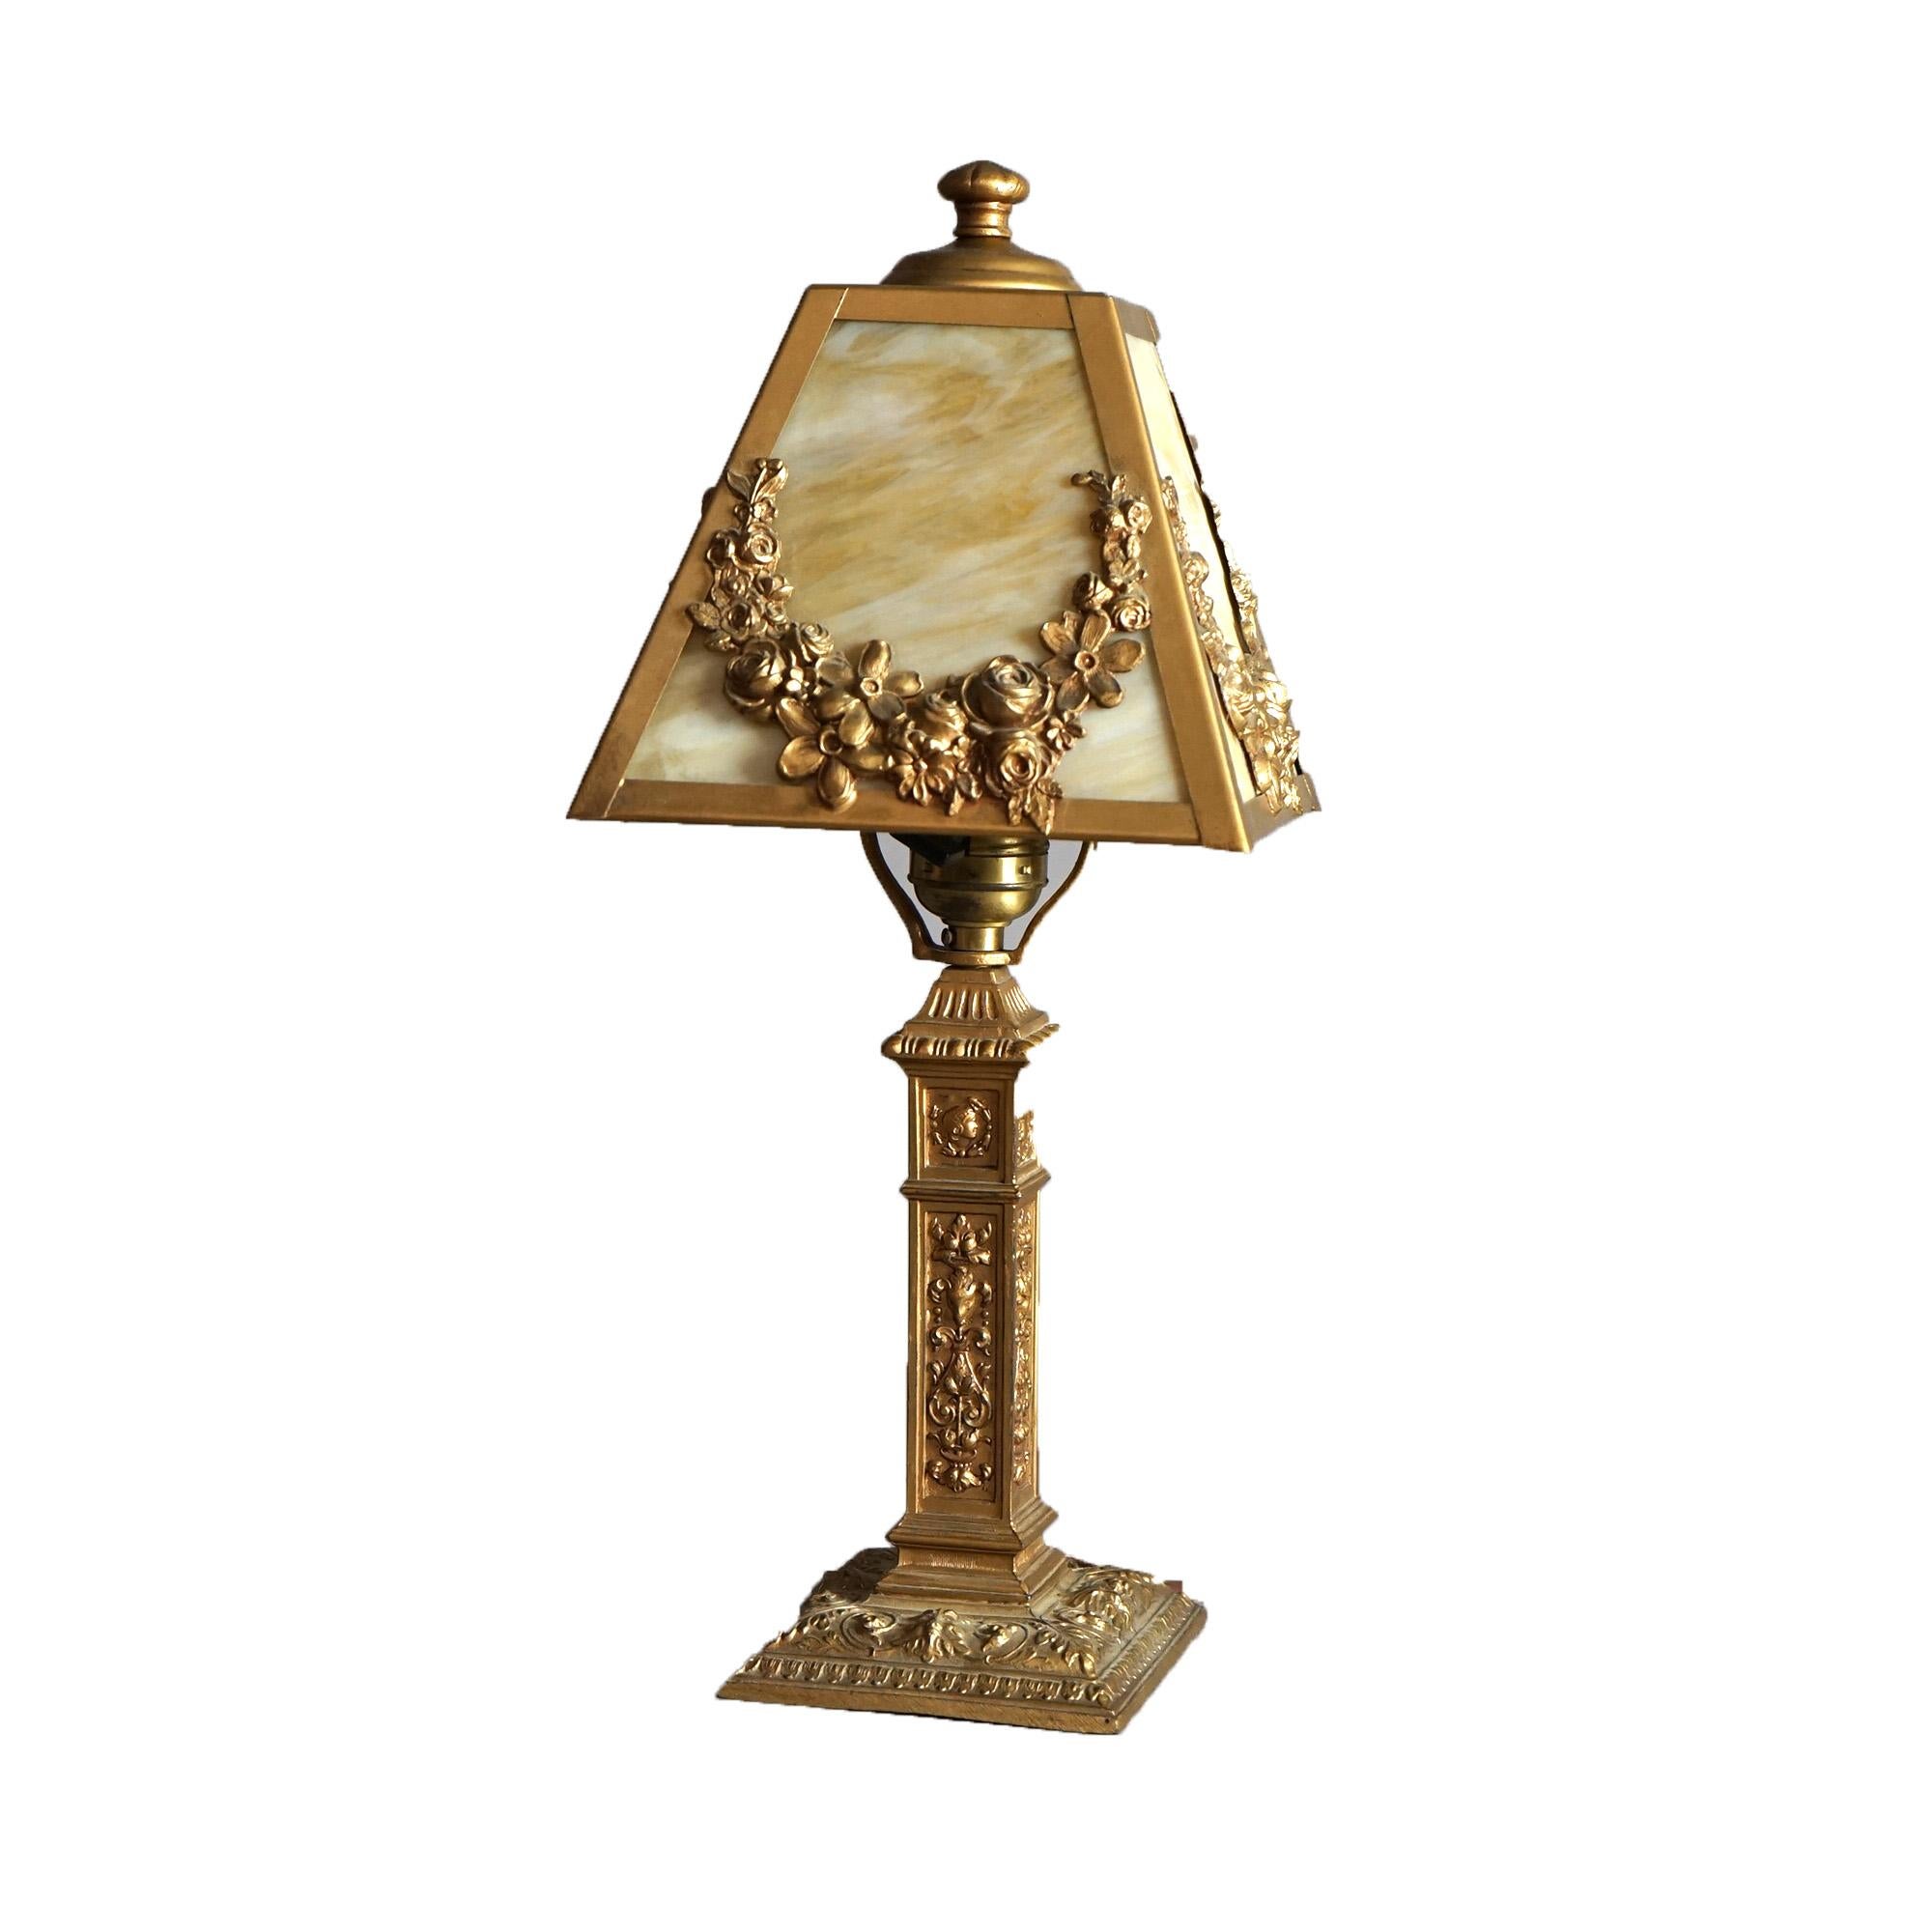 An antique Arts and Crafts boudoir table lamp in the manner of Bradley & Hubbard offers shade with gilt cast metal frame having floral swag elements housing slag glass panels over single socket base, c1910

Measure - 15.5